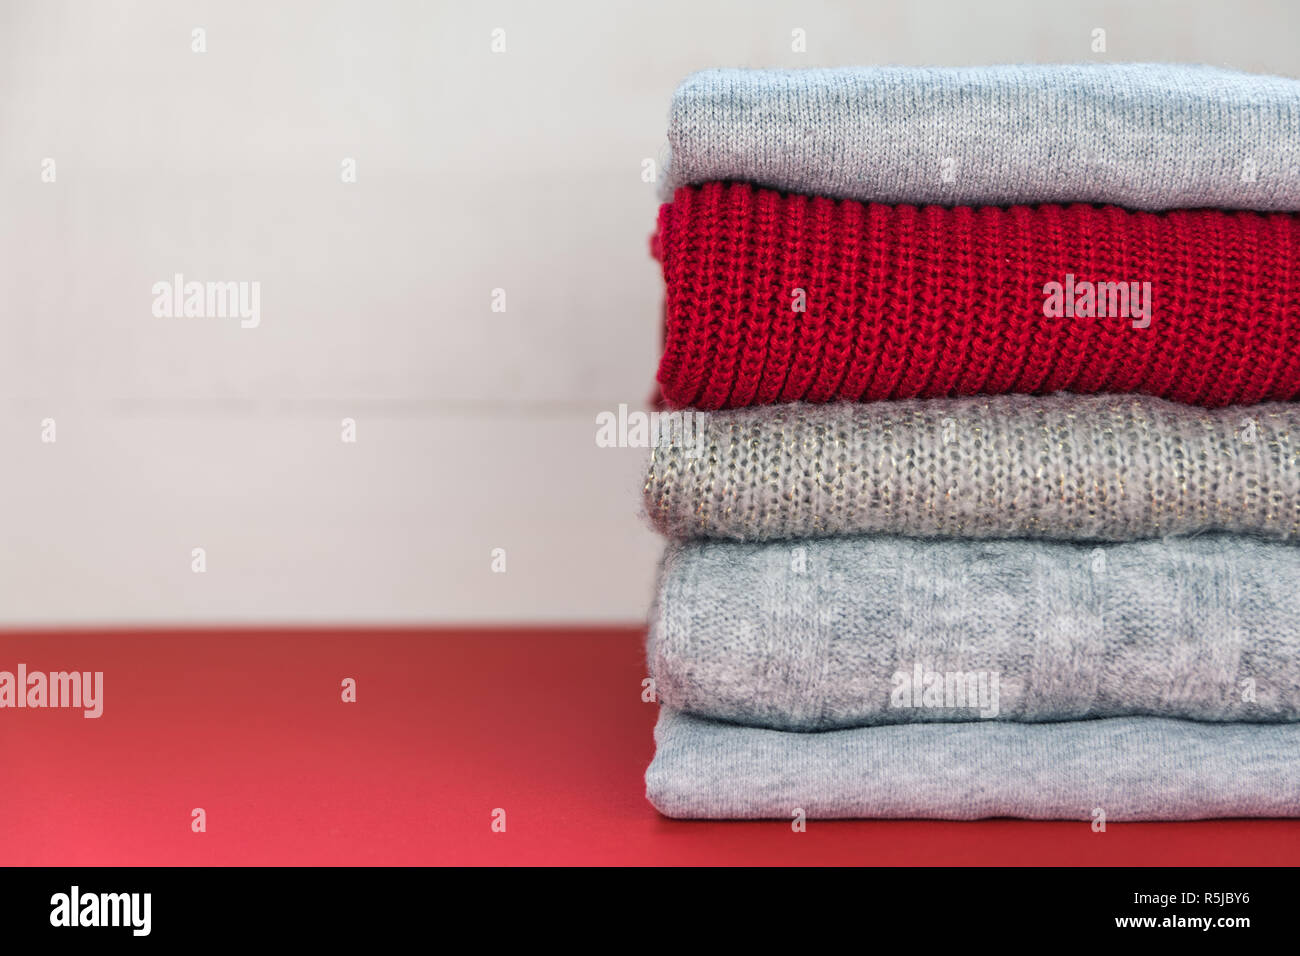 Four grey and one red folded knitted jumpers laying on red surface. Stock Photo